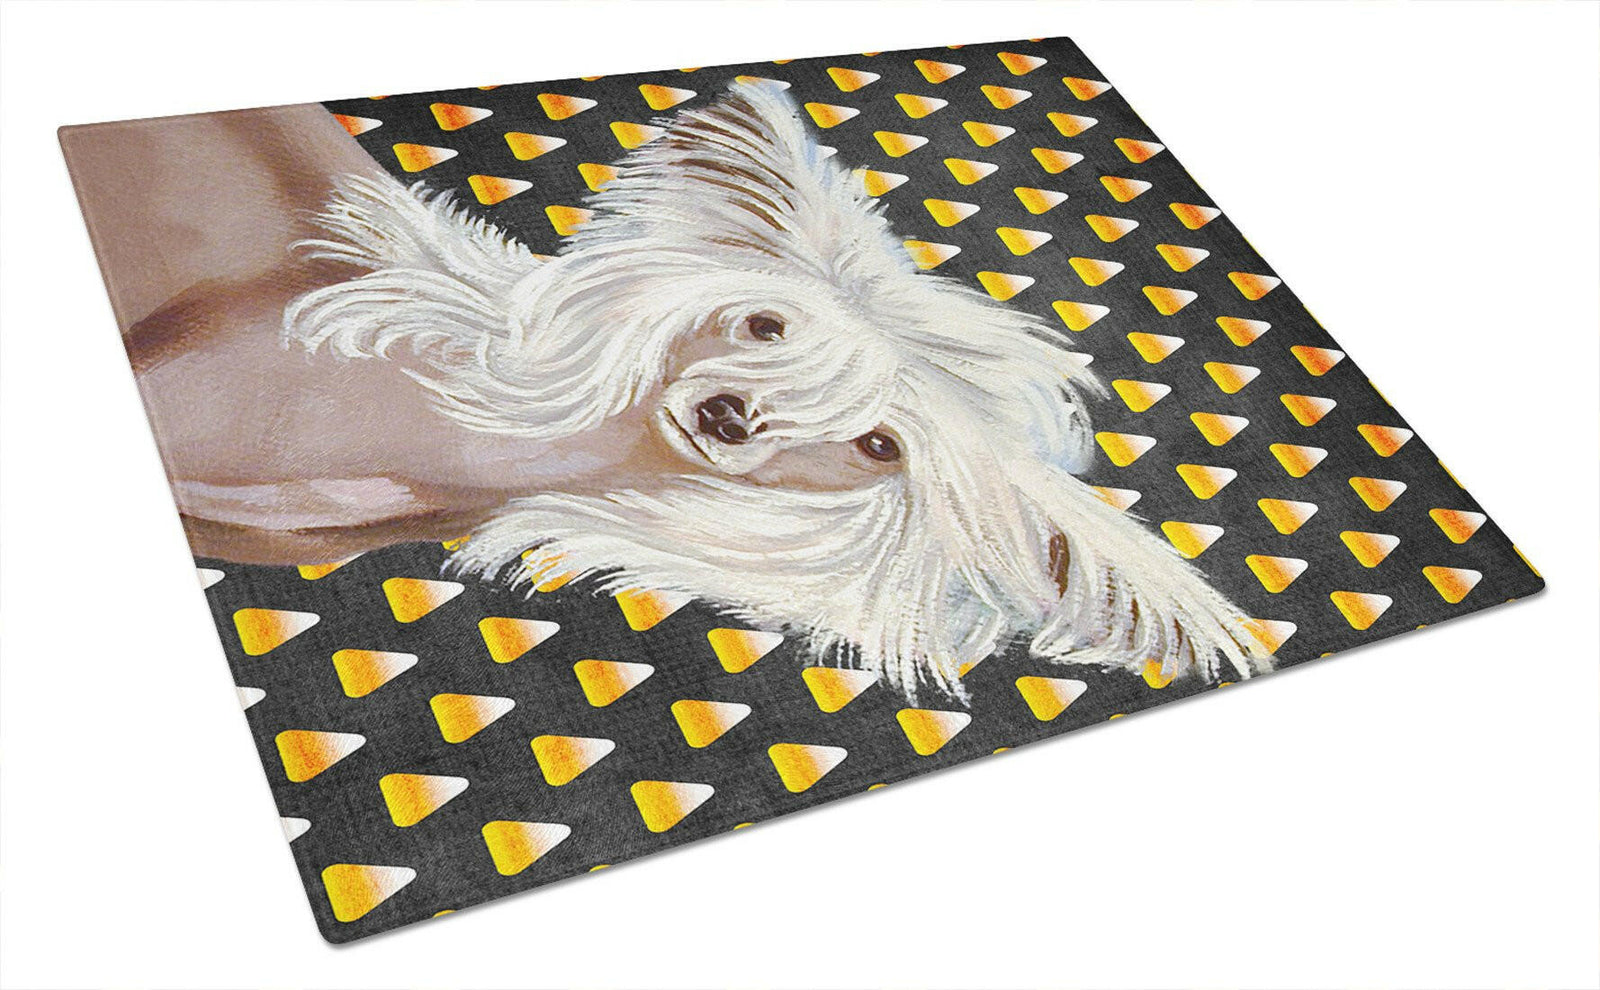 Chinese Crested Candy Corn Halloween Portrait Glass Cutting Board Large by Caroline's Treasures